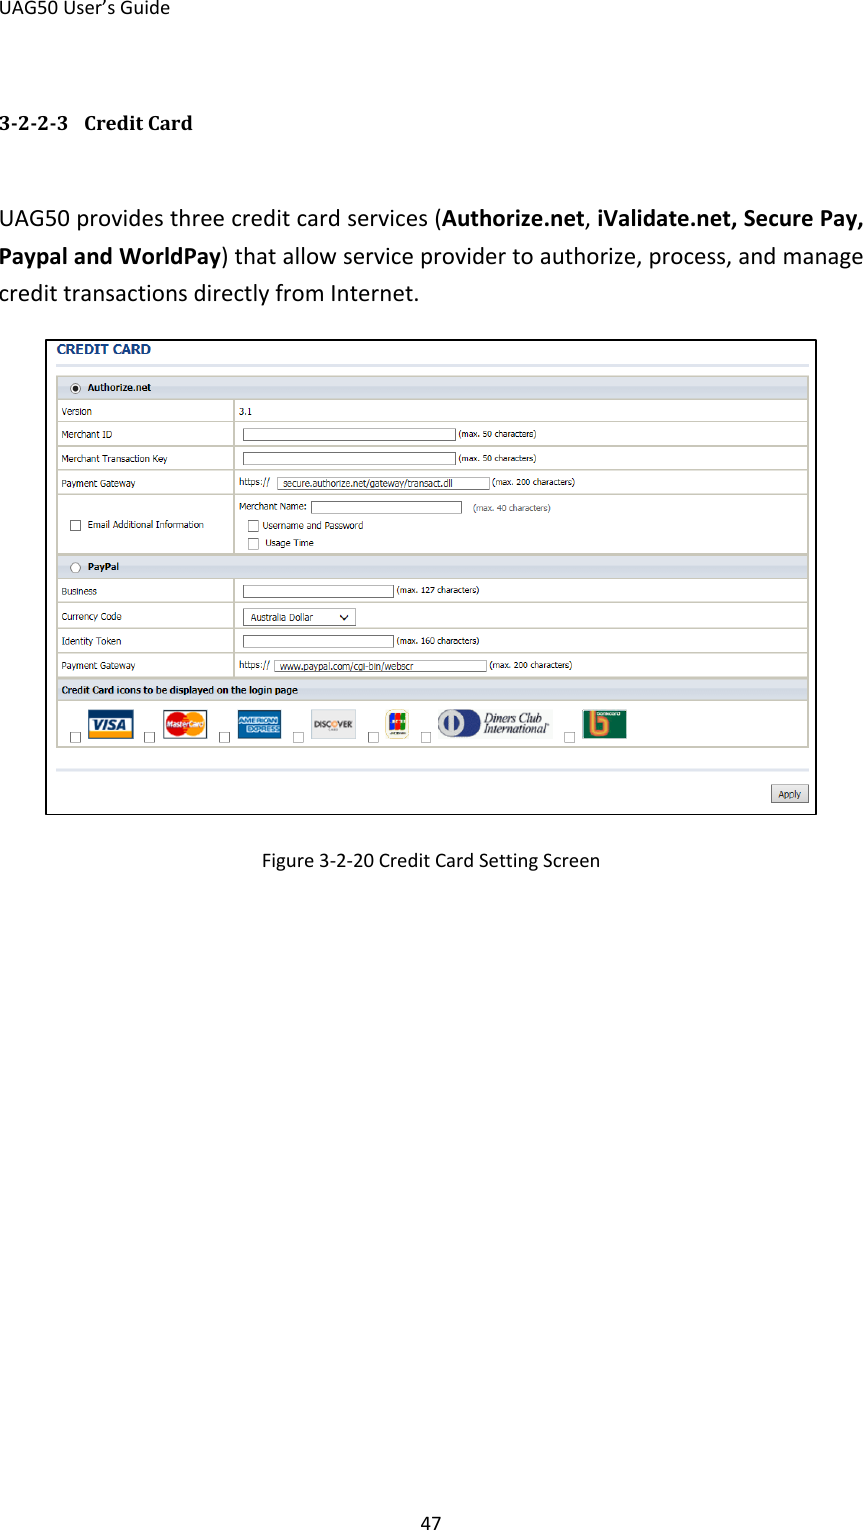 UAG50 User’s Guide 47 3-2-2-3  Credit Card UAG50 provides three credit card services (Authorize.net, iValidate.net, Secure Pay, Paypal and WorldPay) that allow service provider to authorize, process, and manage credit transactions directly from Internet.  Figure 3-2-20 Credit Card Setting Screen 